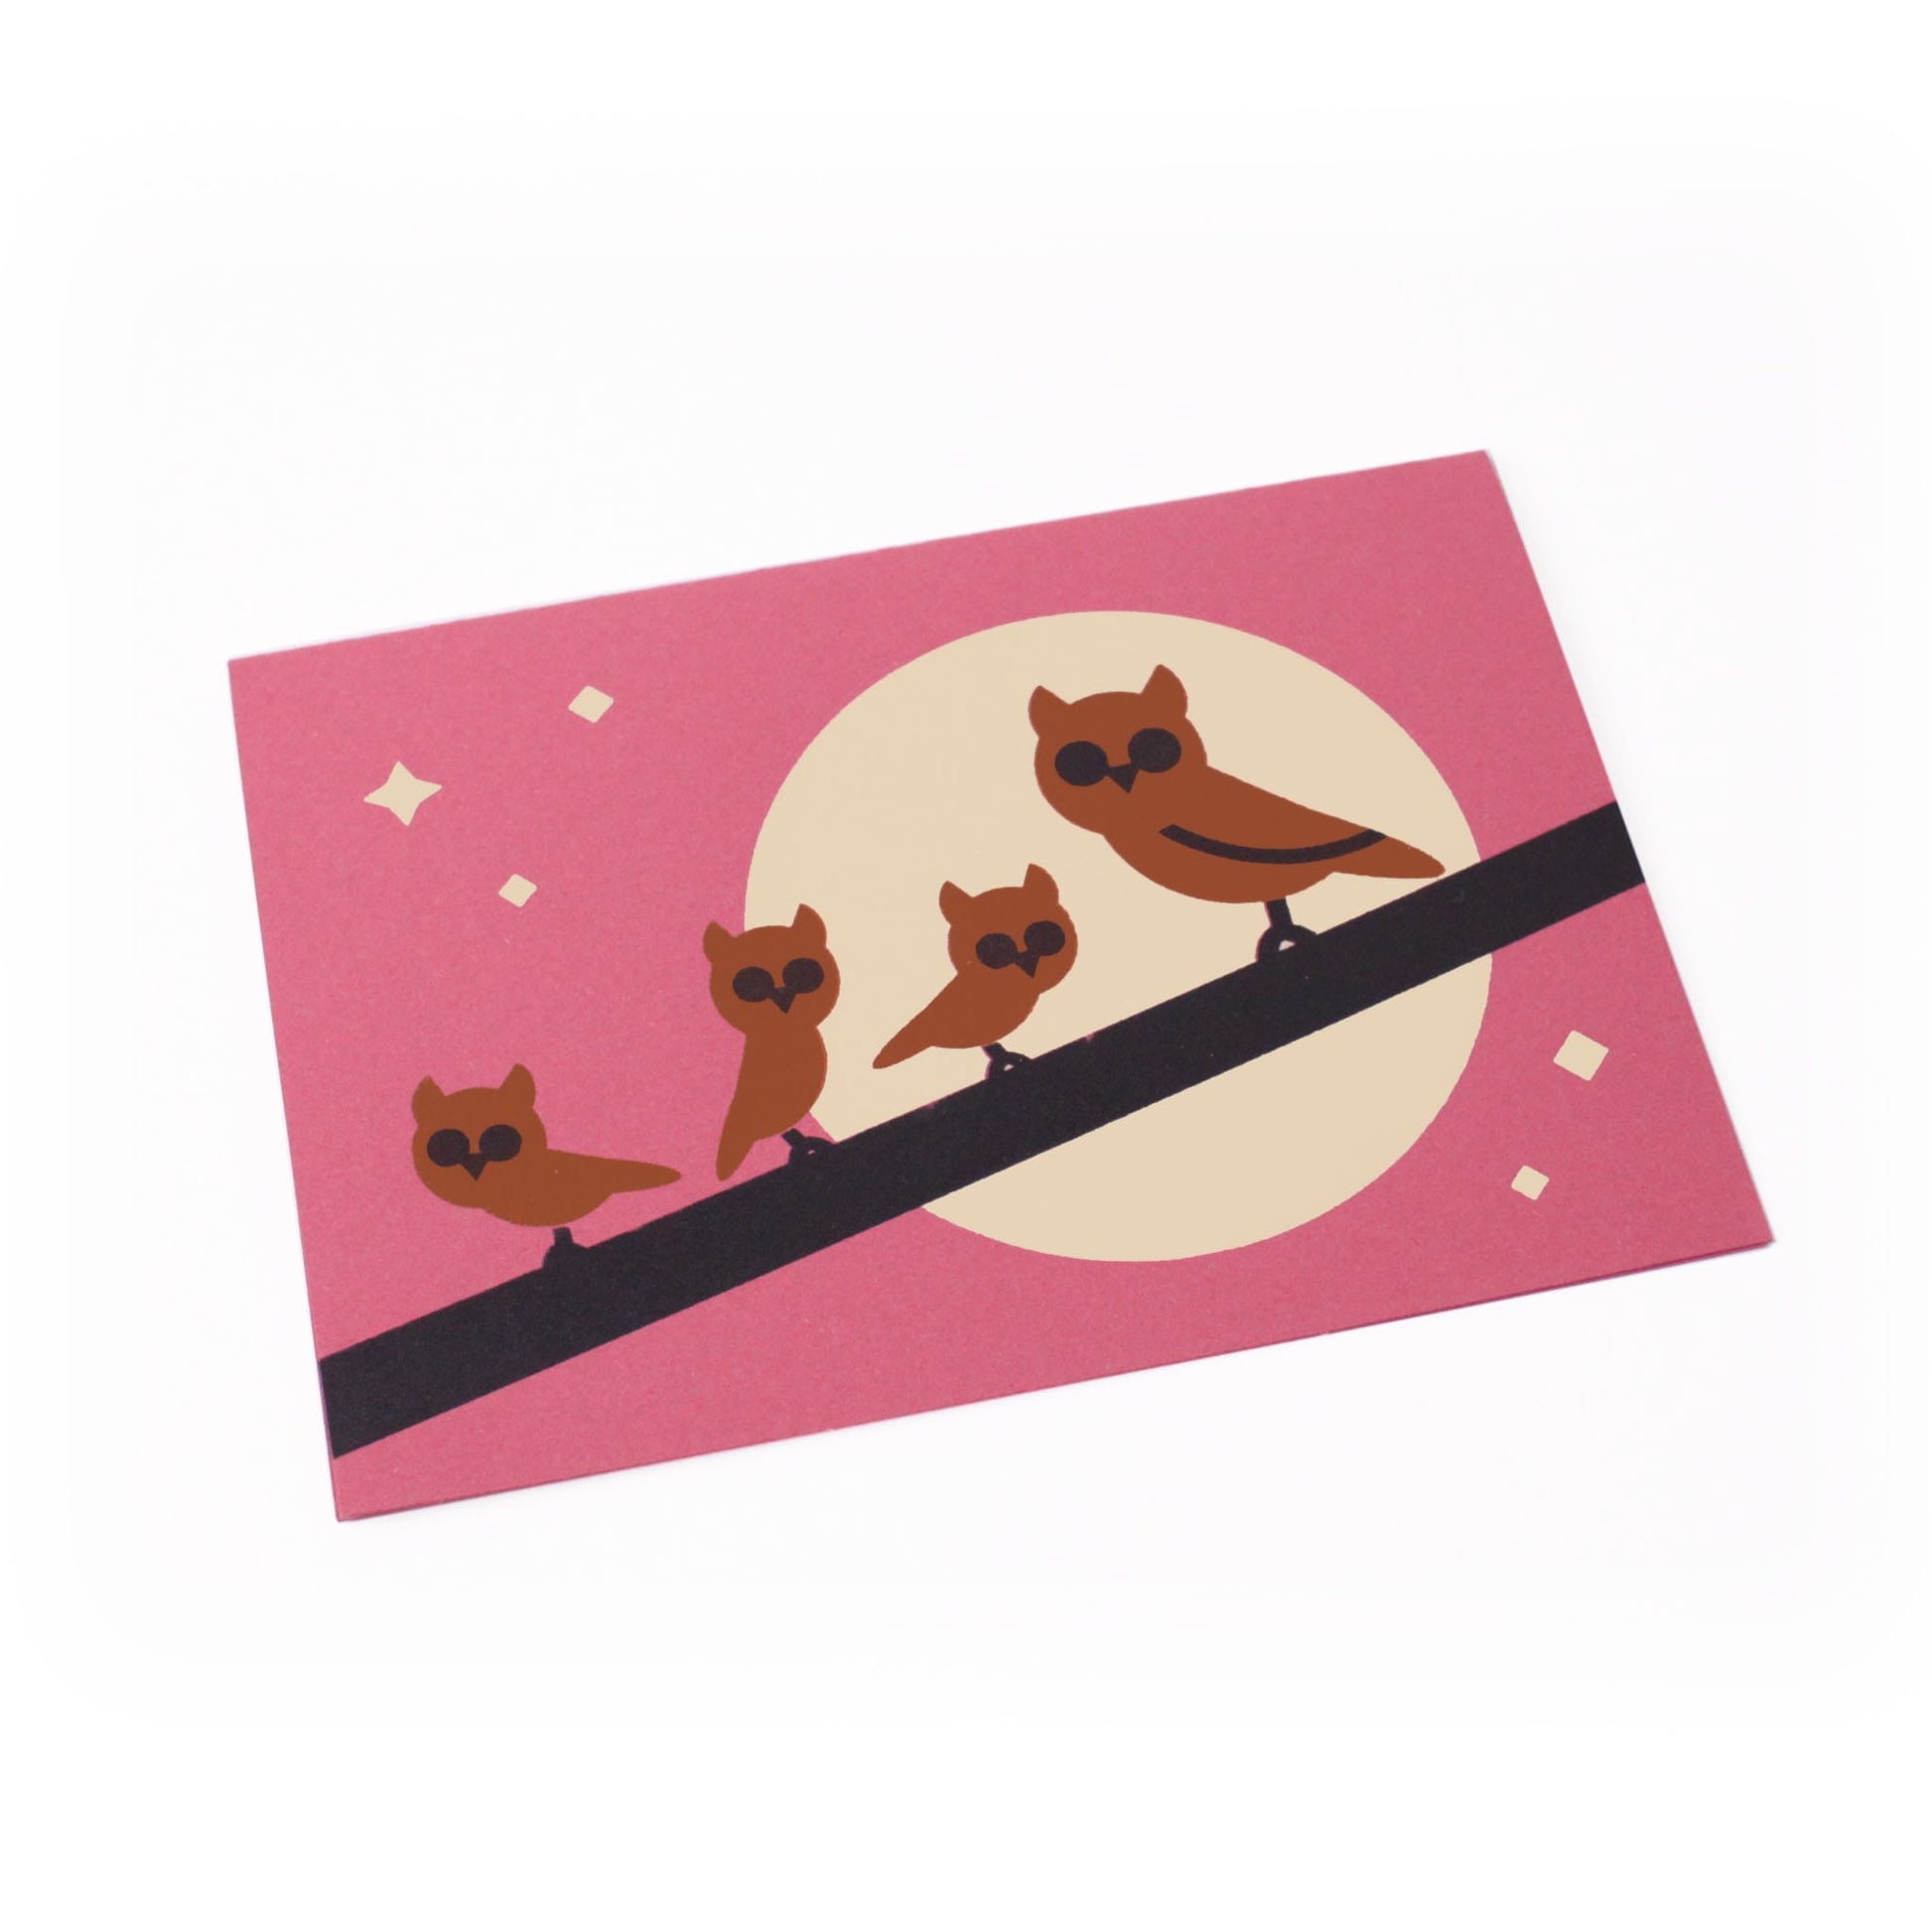 A purple greeting card with an illustration of one big and three small brown owls on a branch, behind them is a moon and stars.